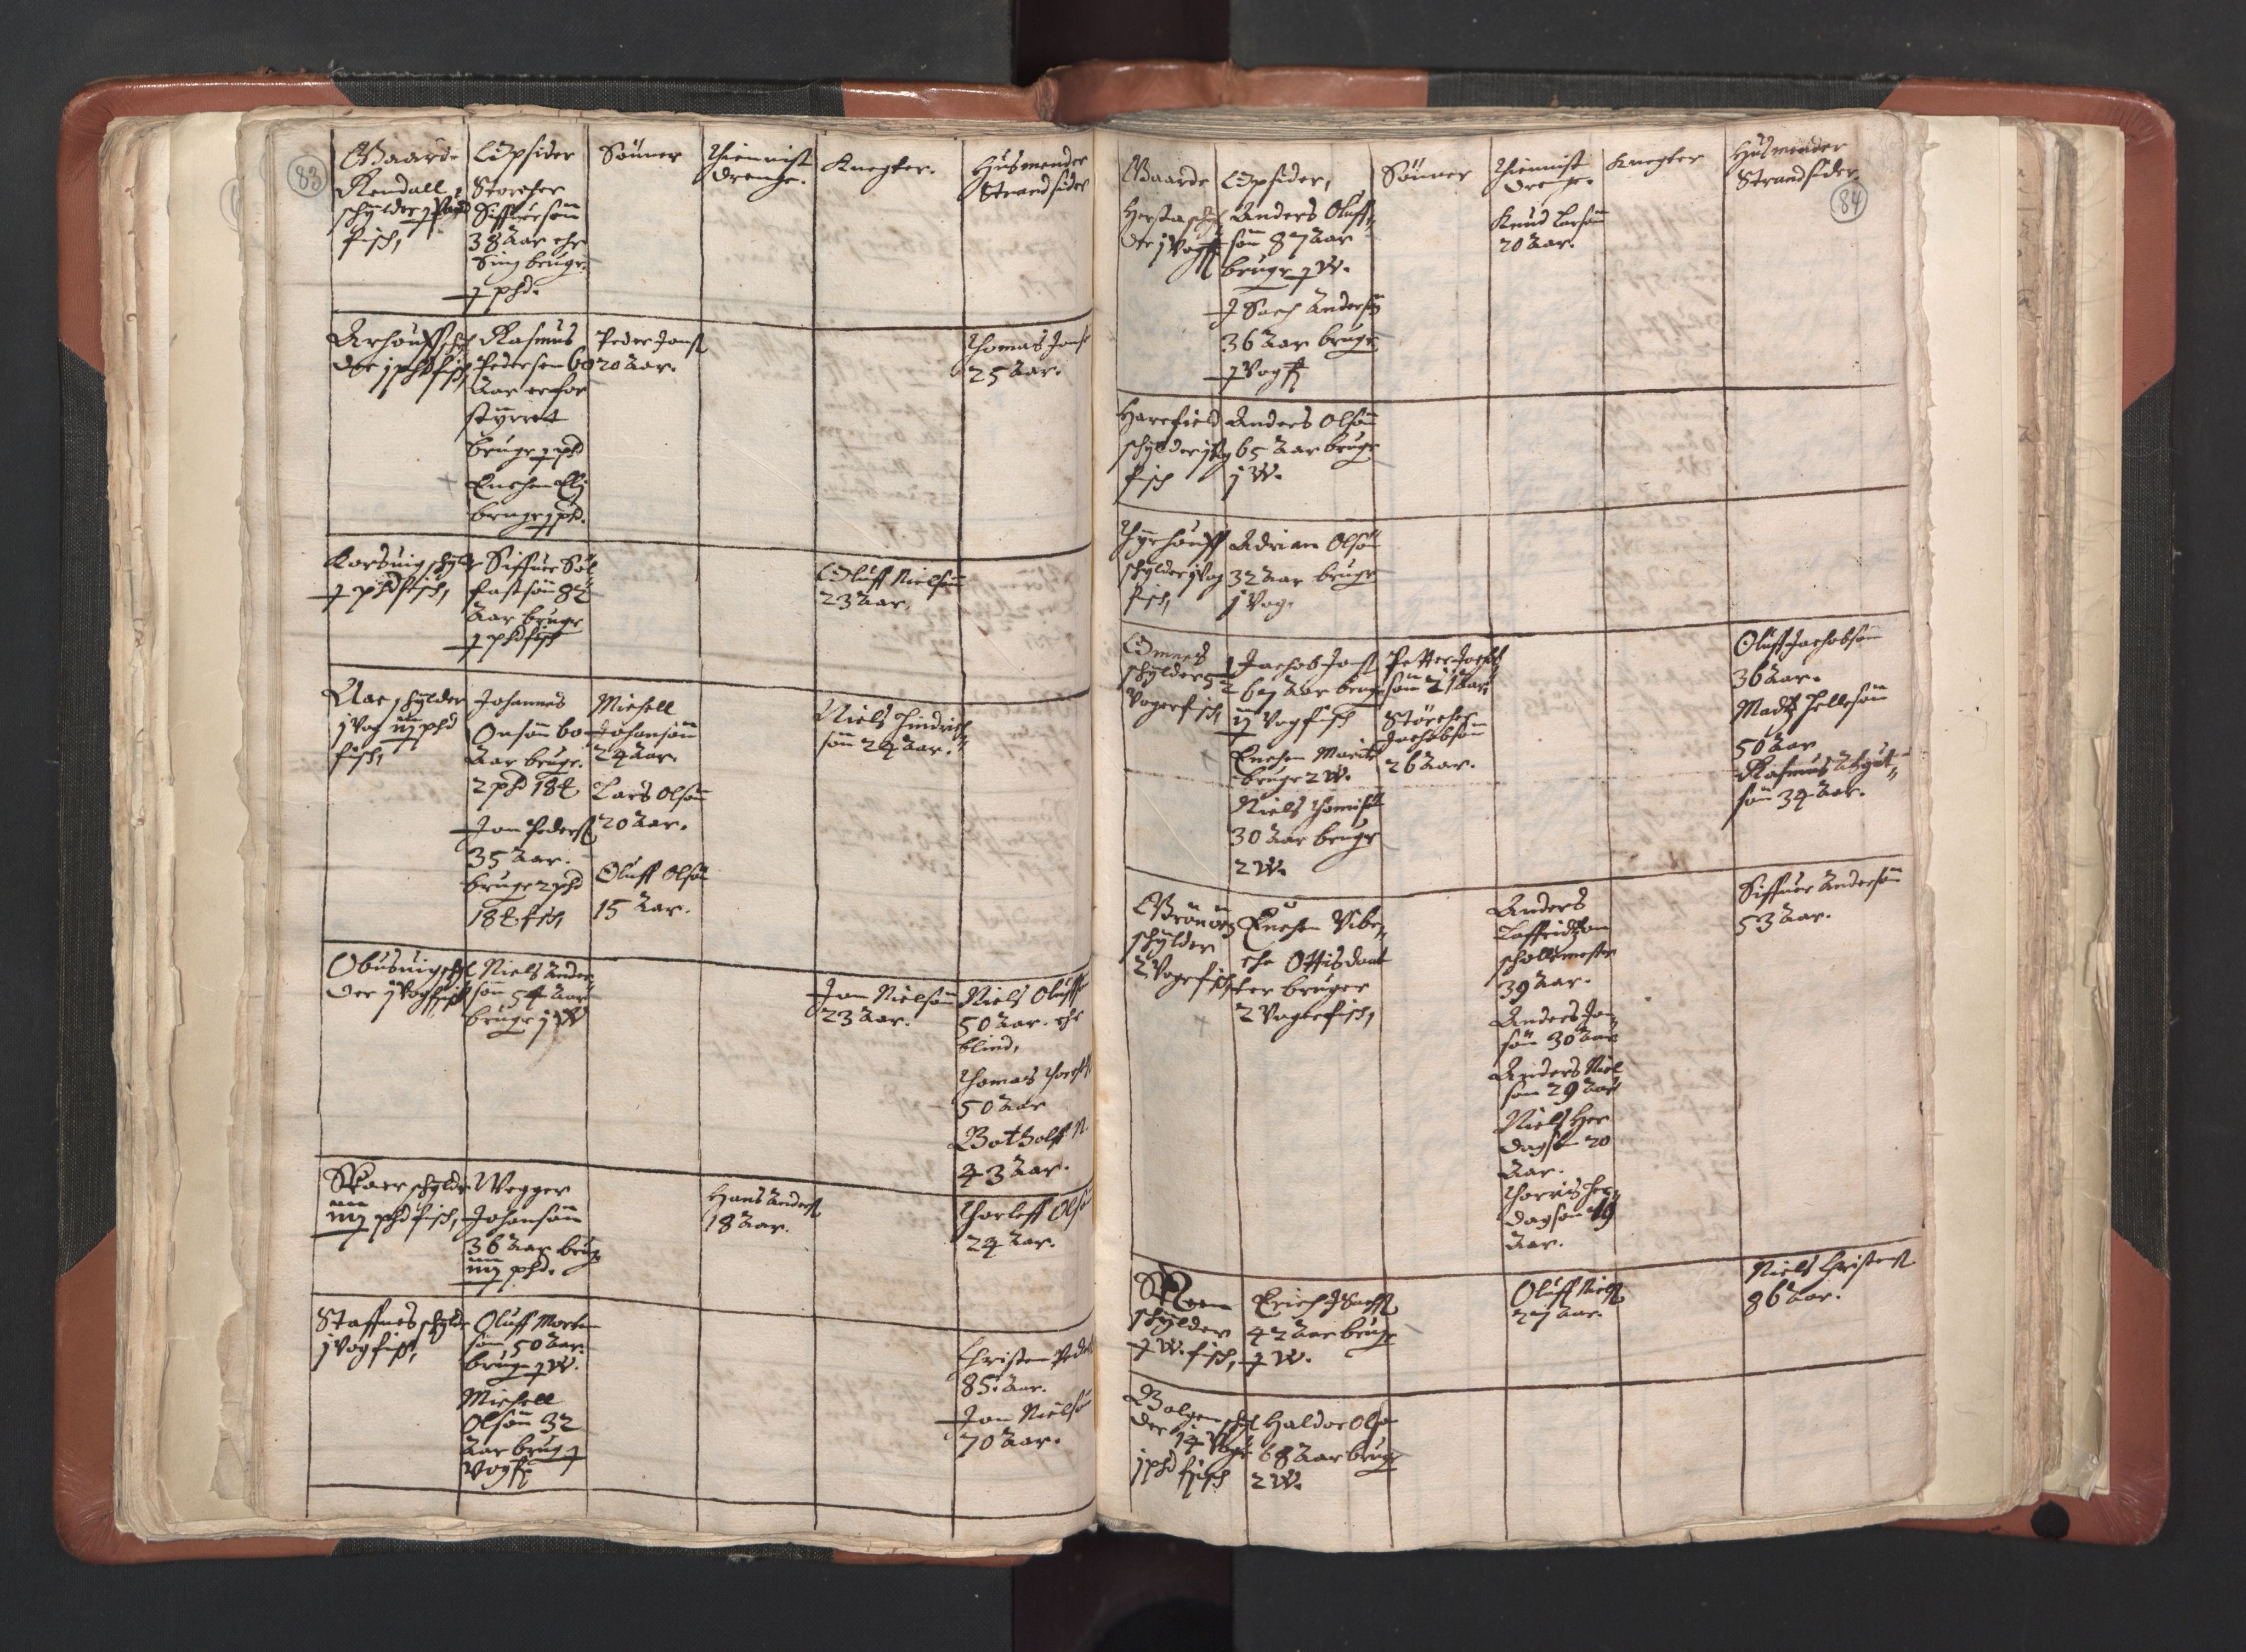 RA, Vicar's Census 1664-1666, no. 35: Helgeland deanery and Salten deanery, 1664-1666, p. 83-84